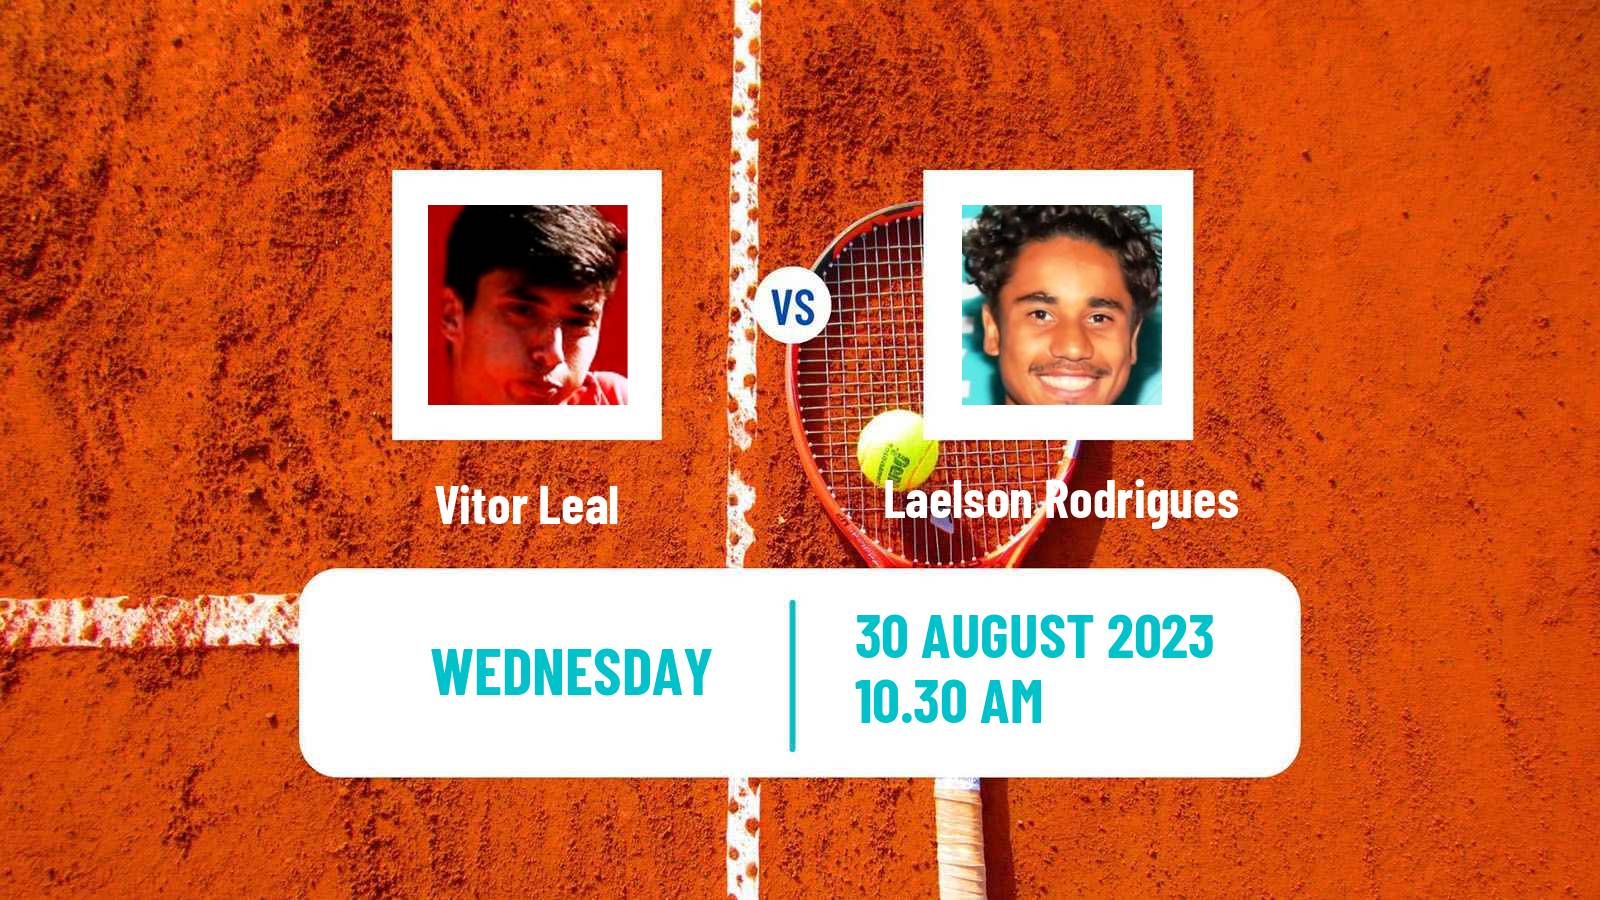 Tennis ITF M15 Buenos Aires Men Vitor Leal - Laelson Rodrigues